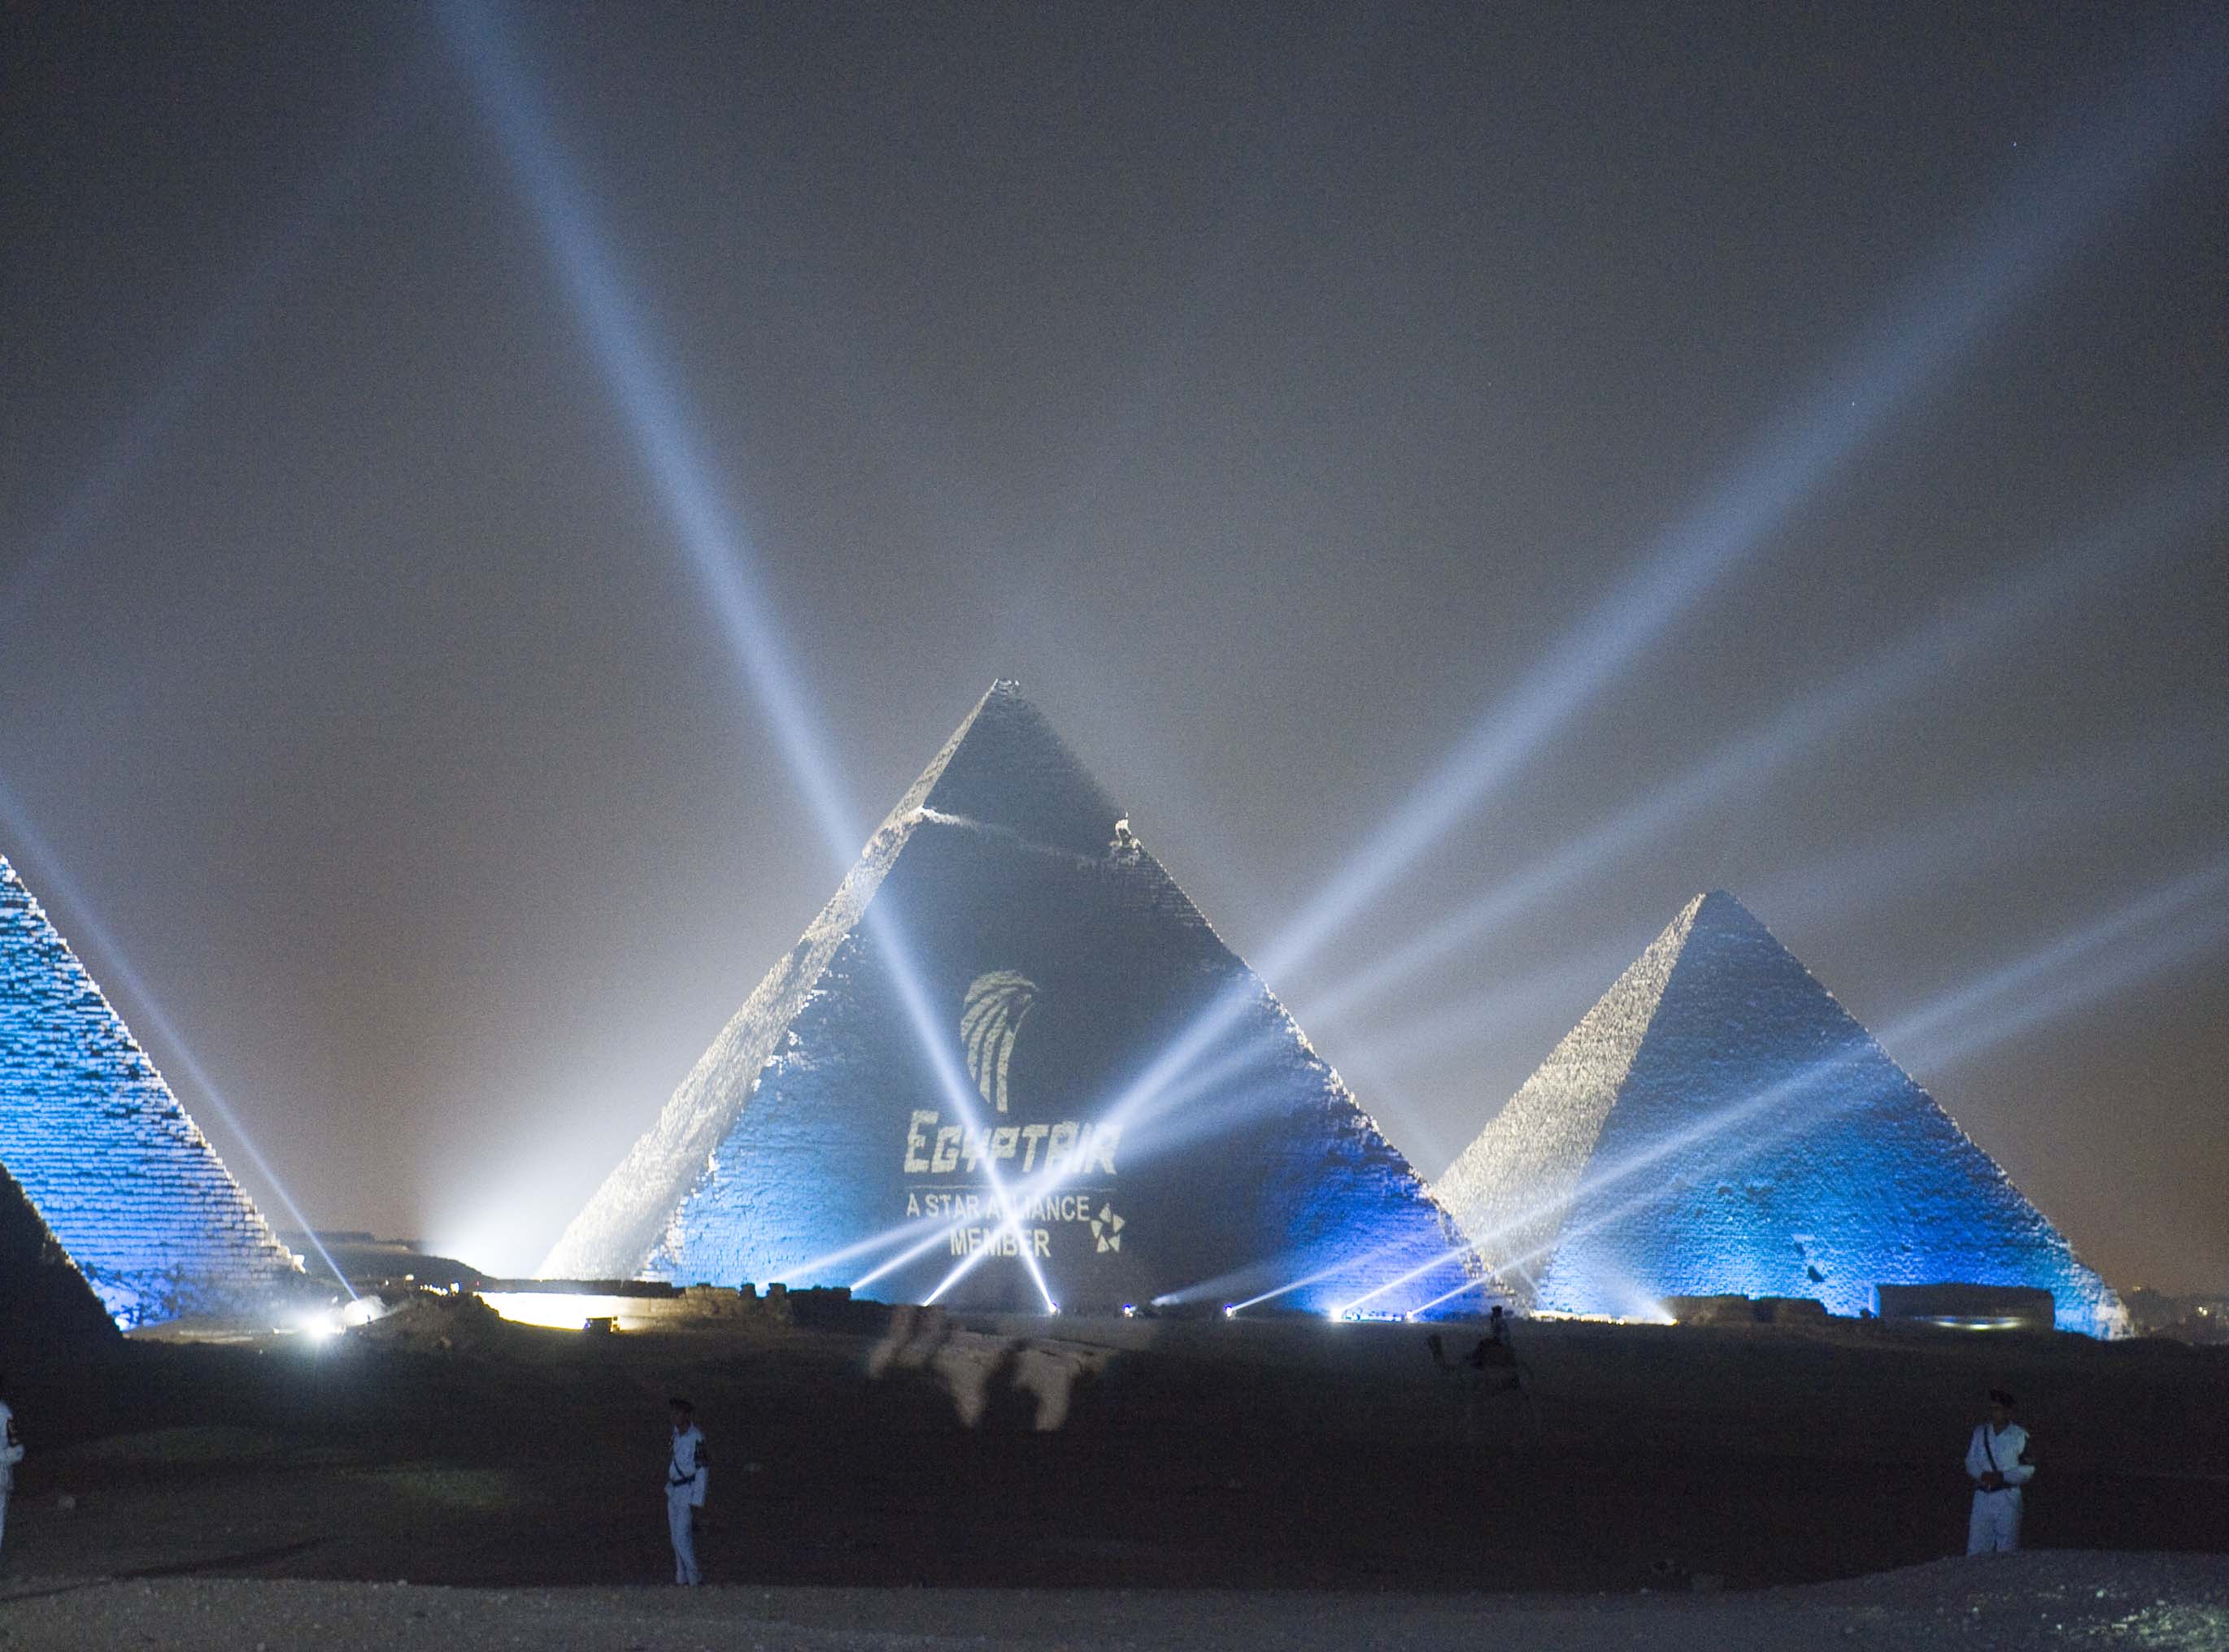 The EgyptAir / Star Alliance Logo projected onto the Pyramids at the joining event as EgyptAir becomes 21st member of the Alliance, Cairo, July 11, 2008.